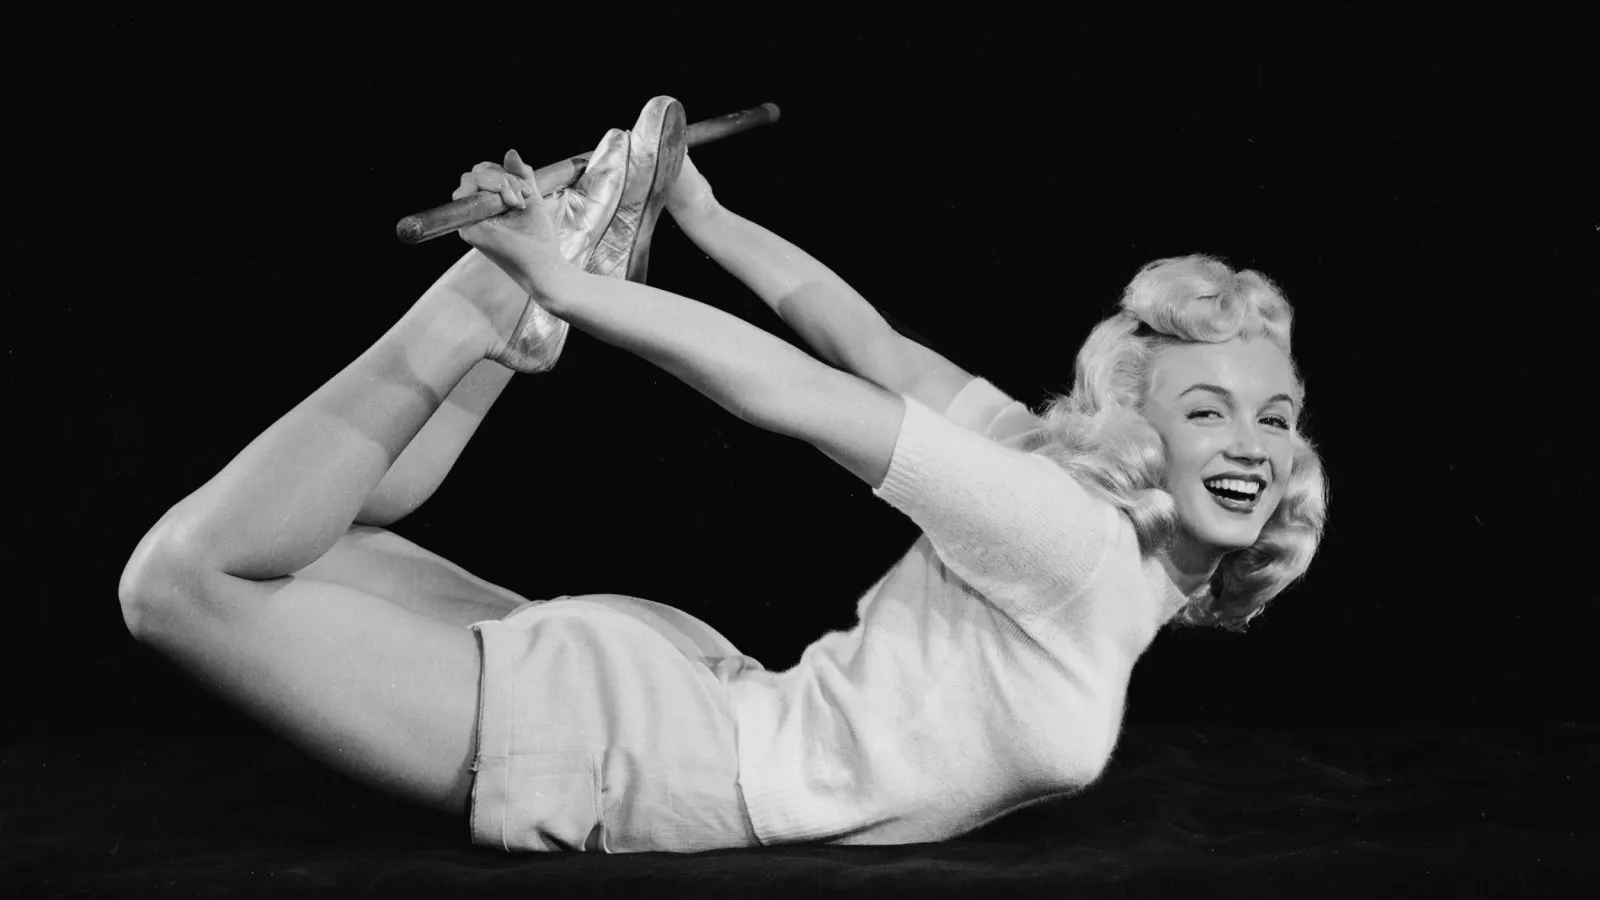 10 Marilyn Monroe Movies You Can Watch Now